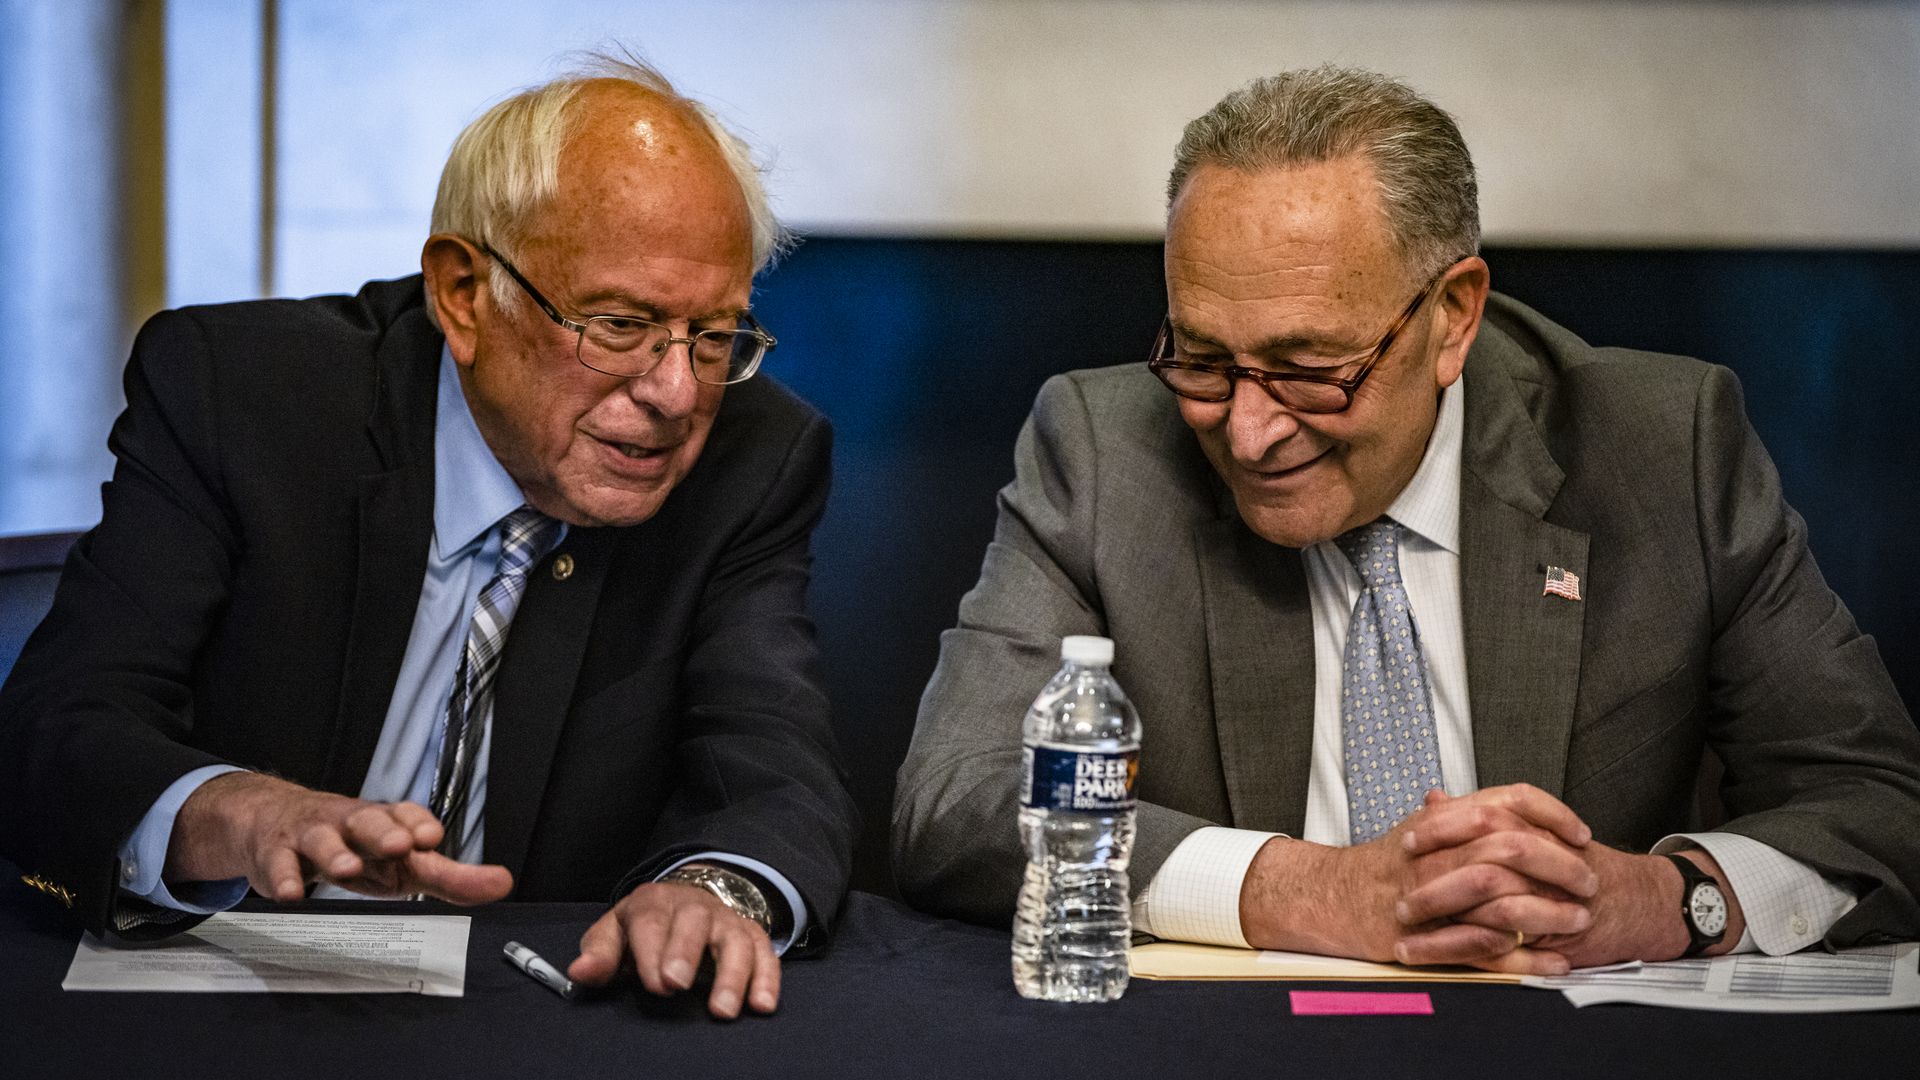 U.S. Senate Majority Leader Chuck Schumer (D-NY) and Committee Chairman Bernie Sanders (D-VT) holding a meeting with Senate Budget Committee Democrats 